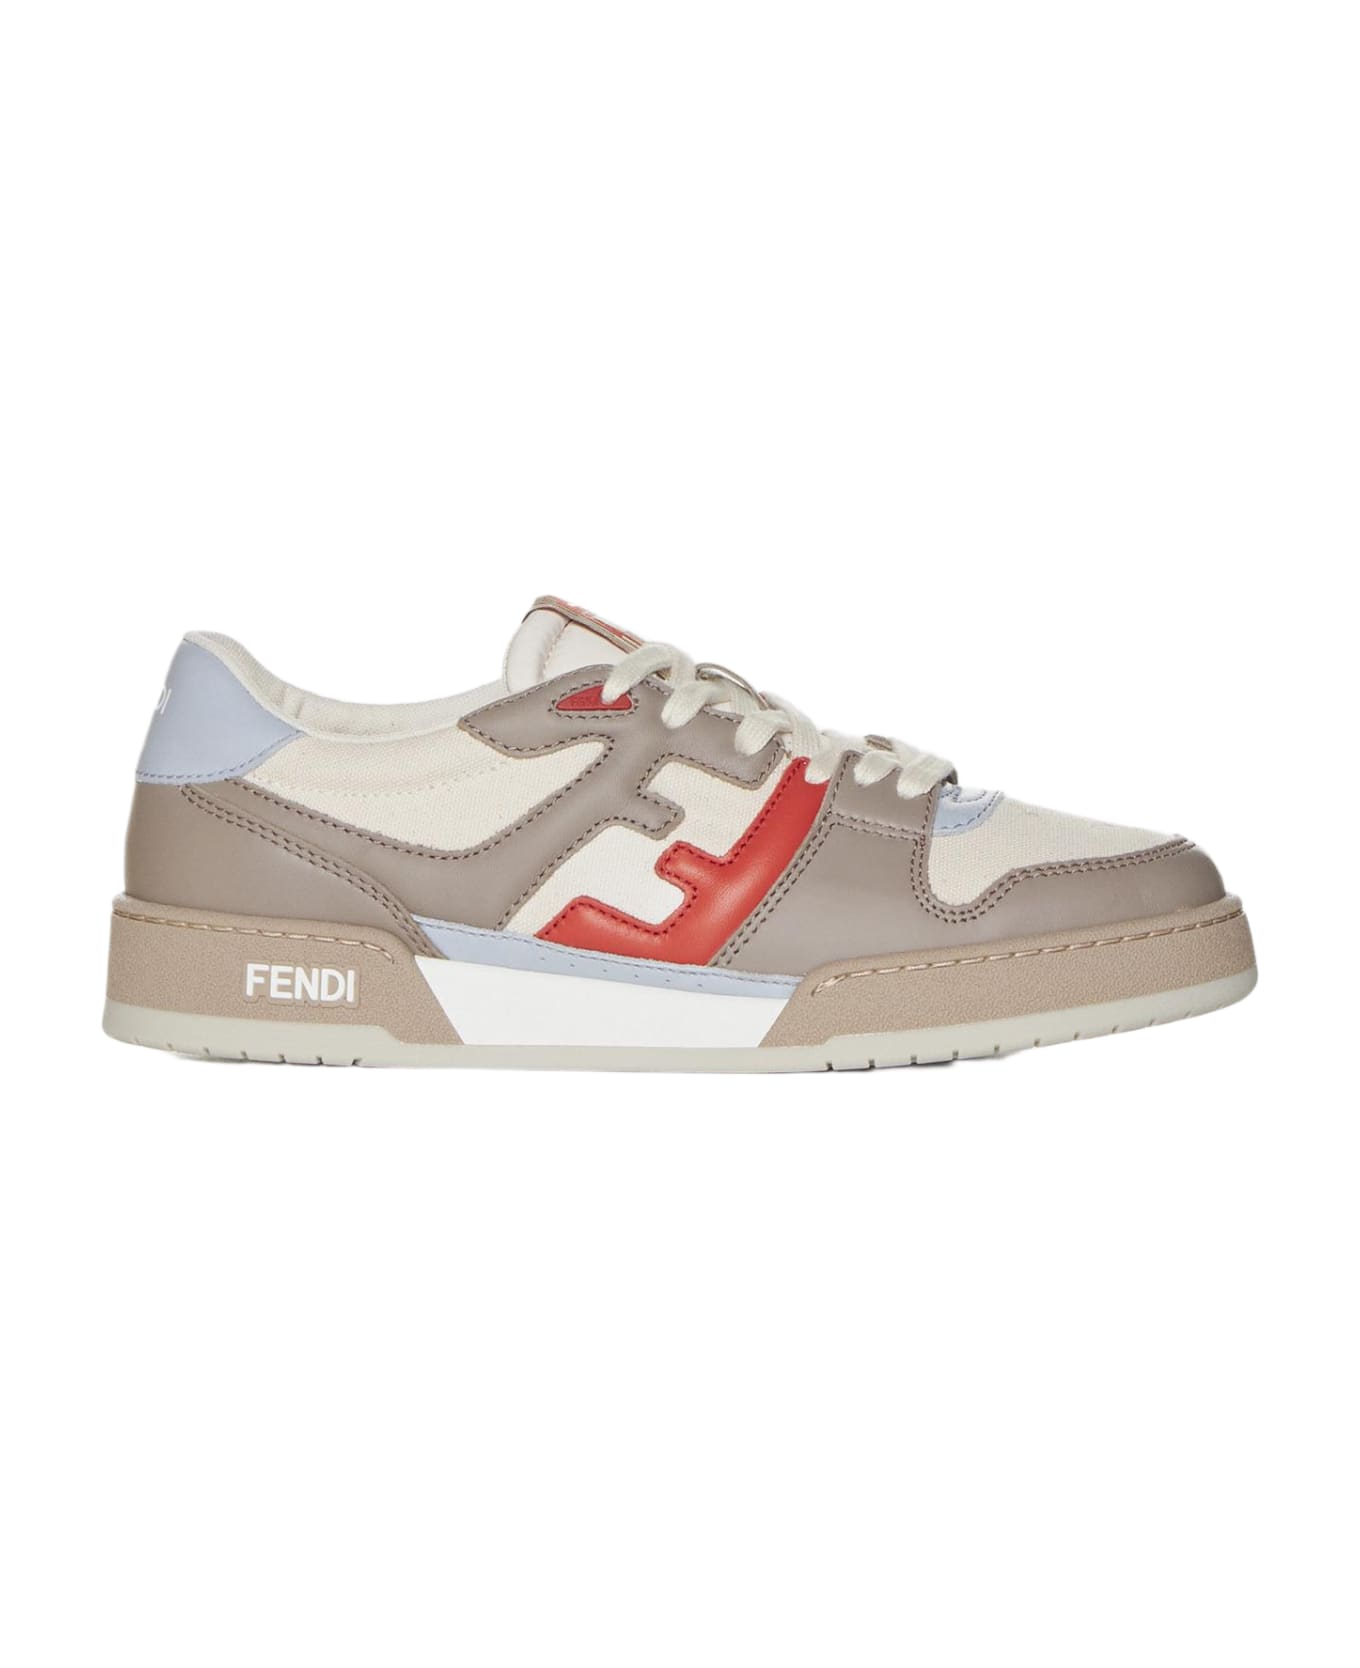 Fendi Match Leather And Fabric Sneakers - Beige